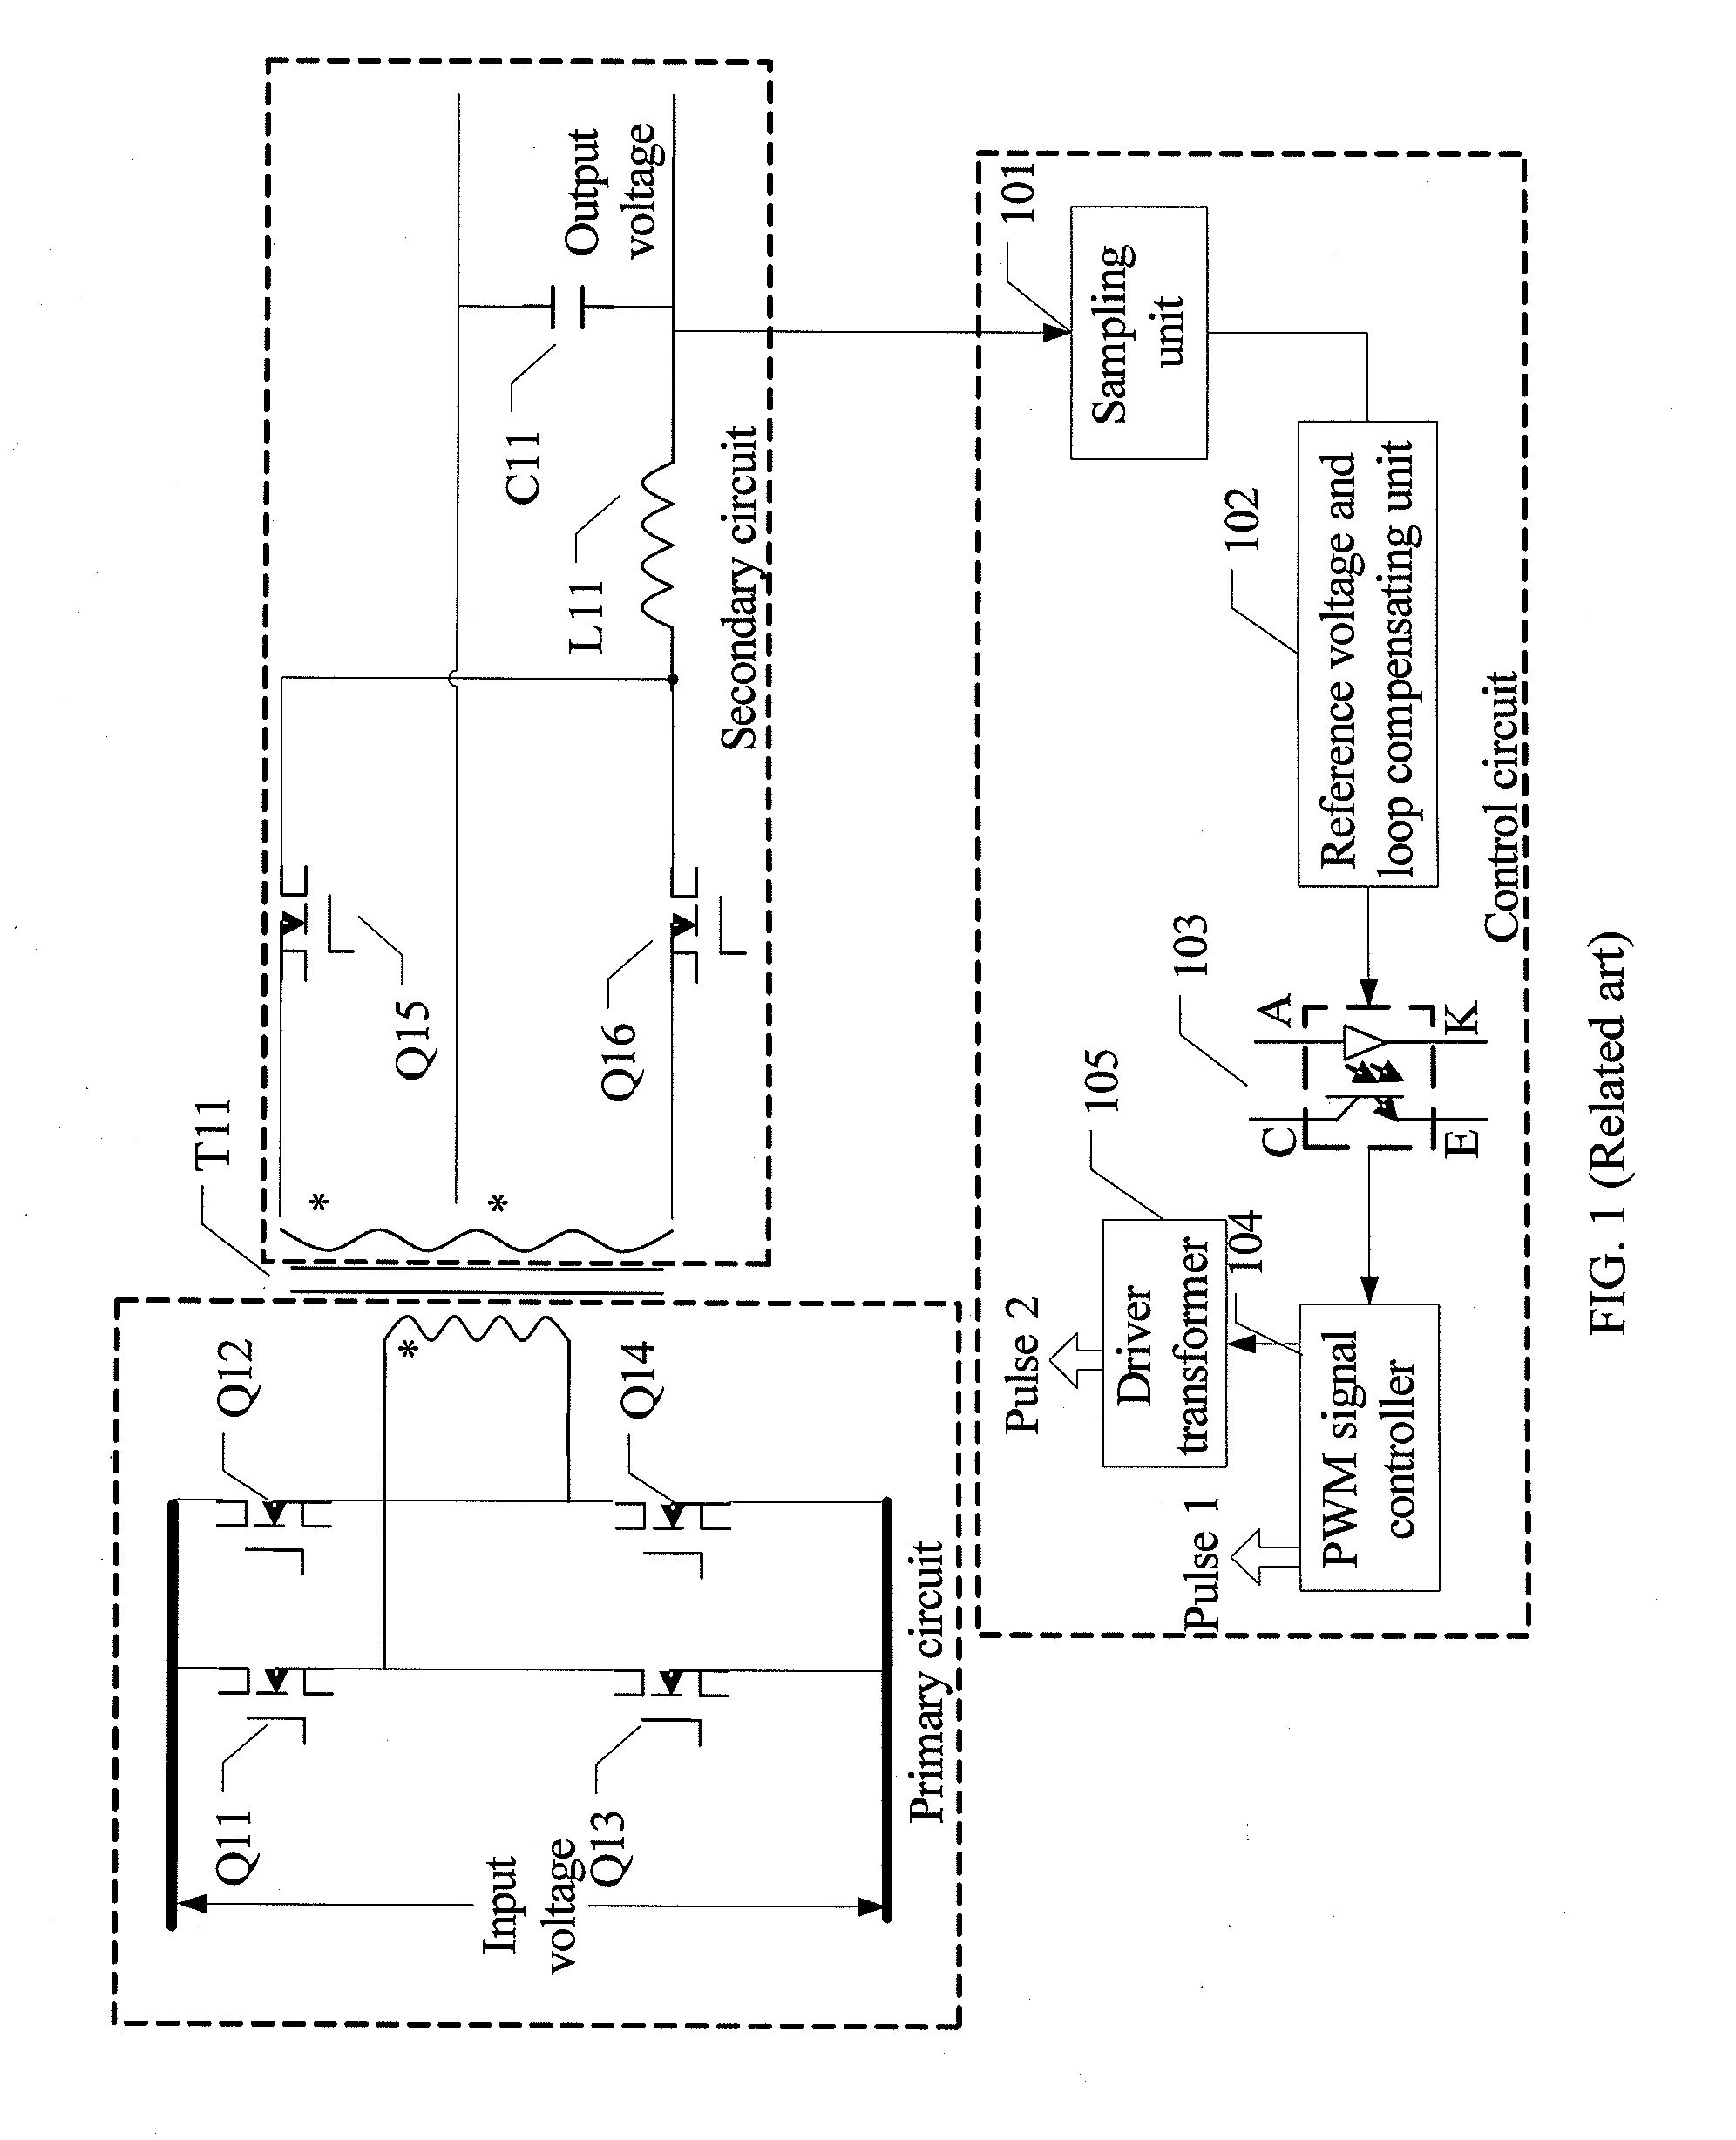 Dc-dc power supply apparatus method for improving dc-dc power supply apparatus